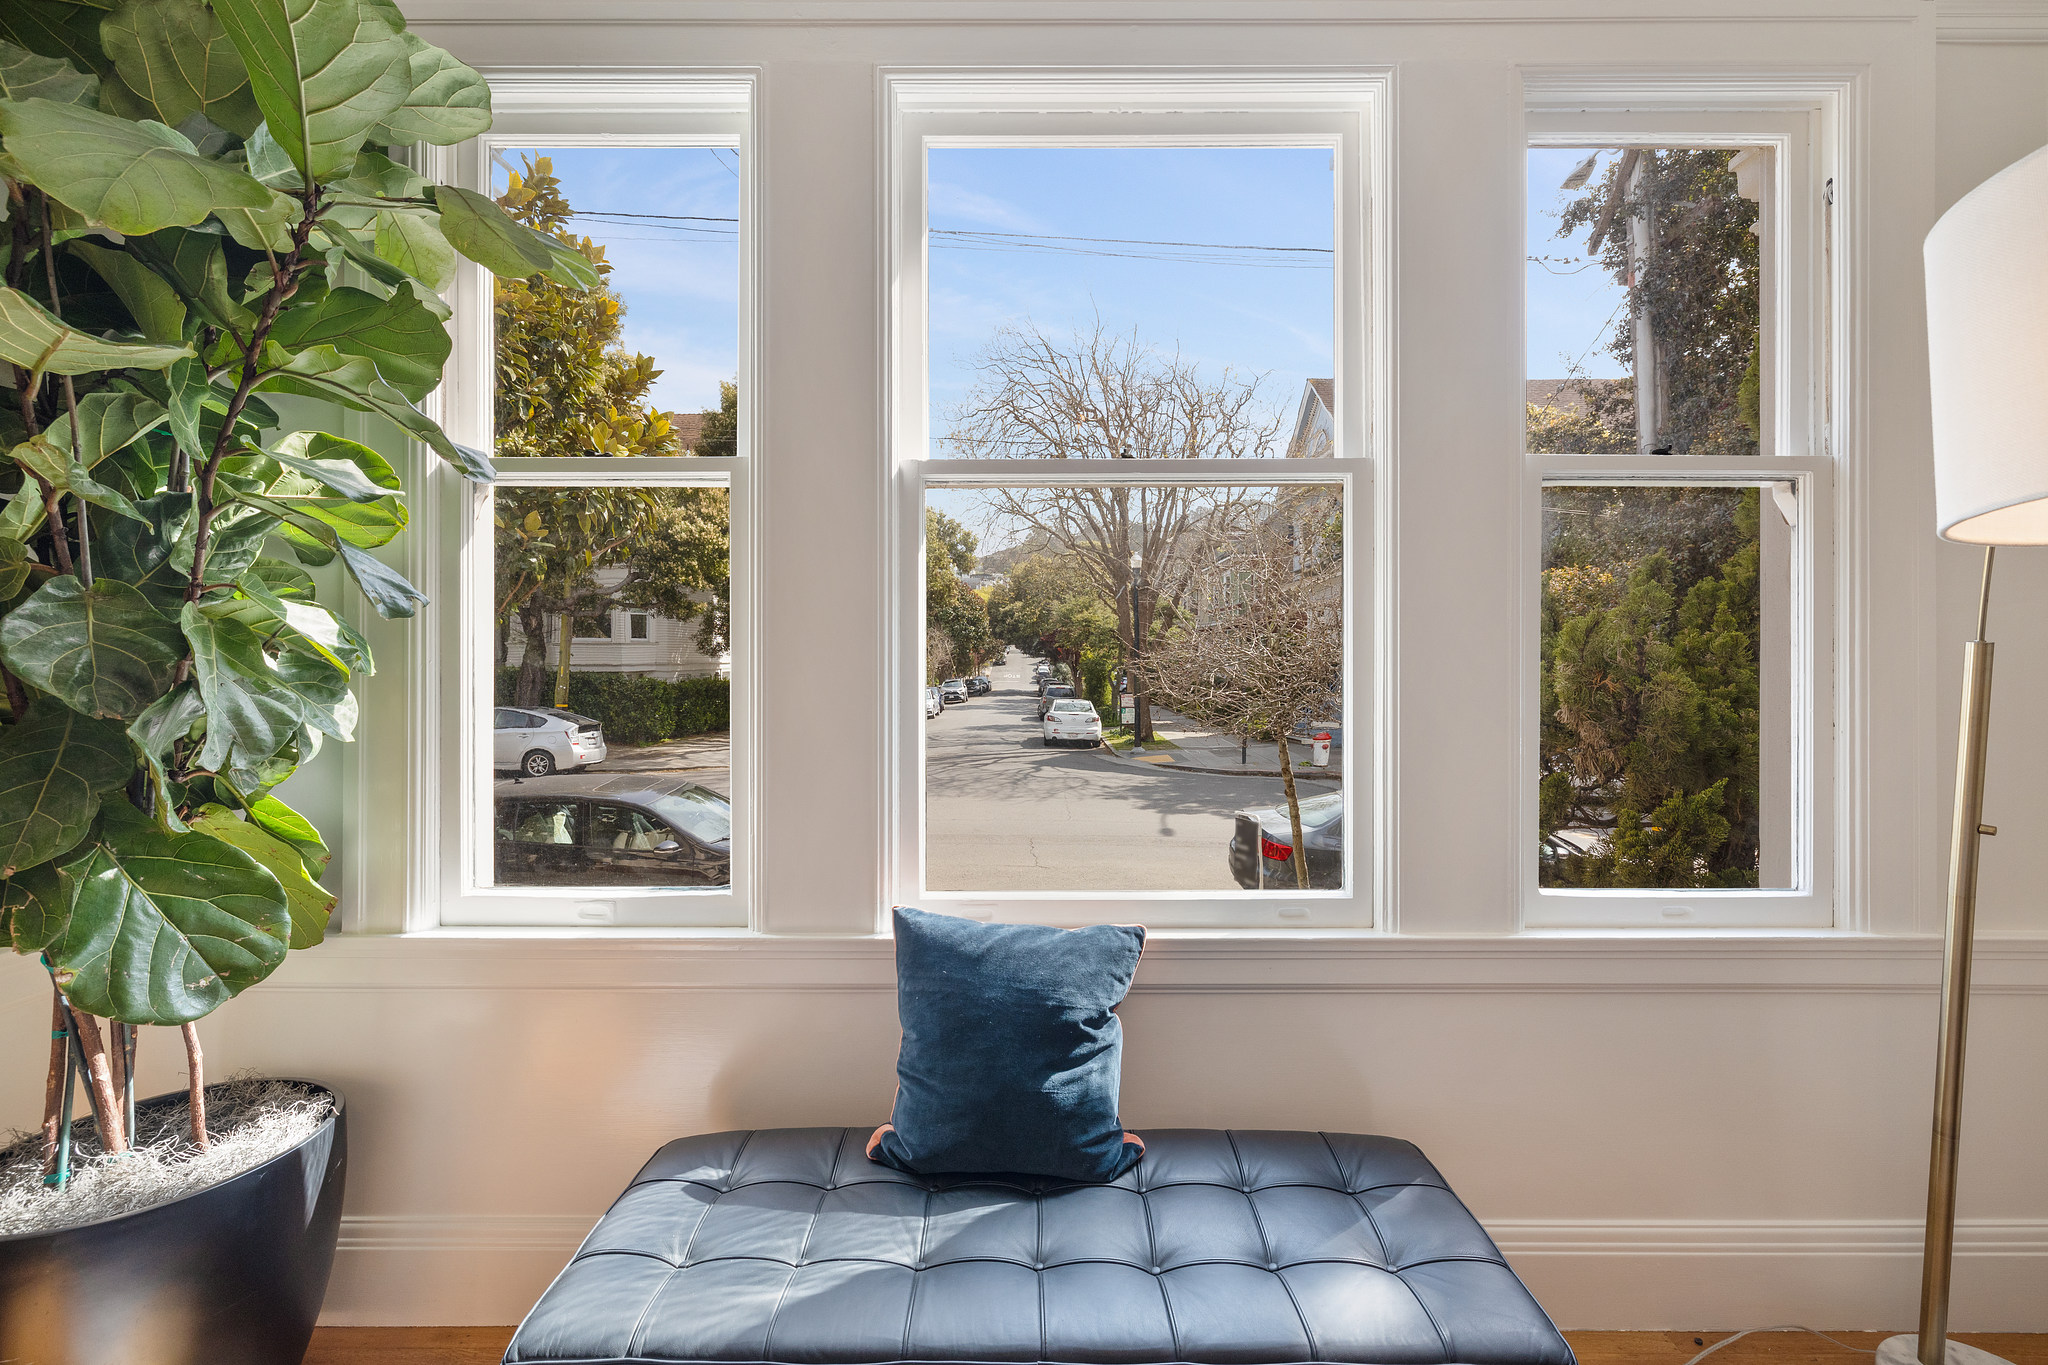 Property Photo: Close-up of the living room windows and view of the tree-lined street beyond